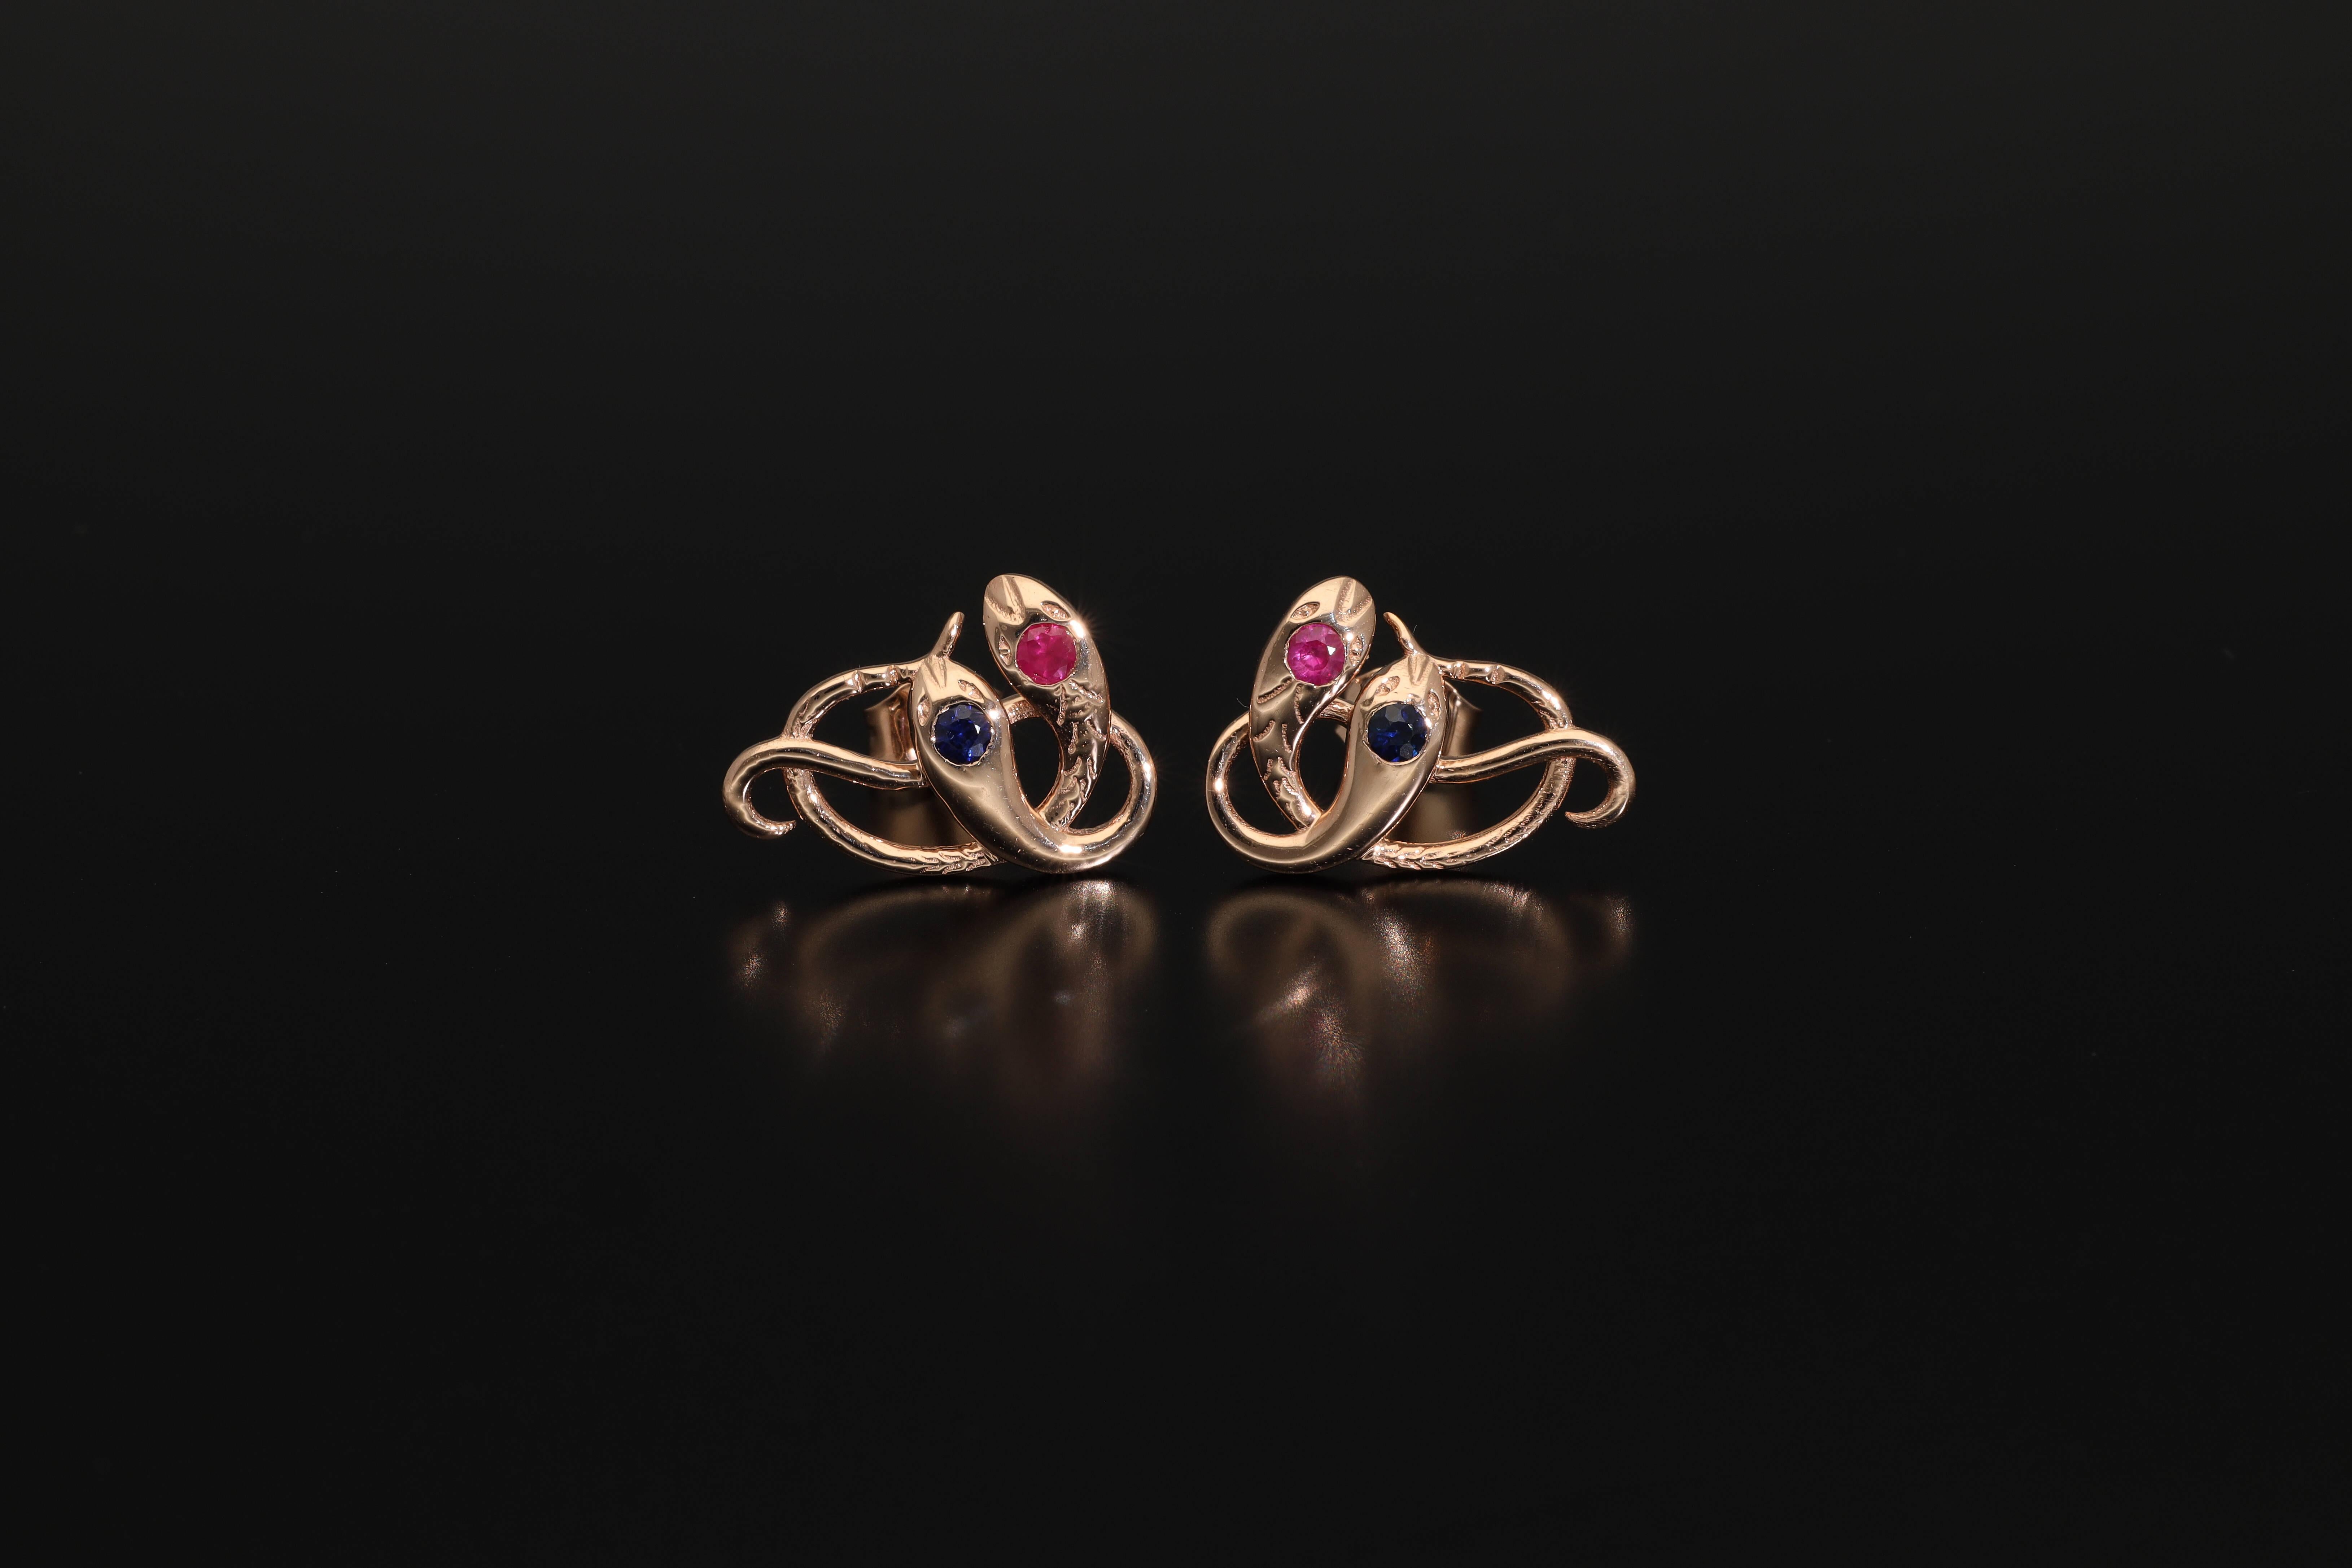 A  beautiful antique revival pair of rose gold snake stud earrings! These unique statement earrings are made of solid 14 karat gold and are set with natural rubies and sapphires.
Snake rings were extremely popular in Victorian/Edwardian jewellery as